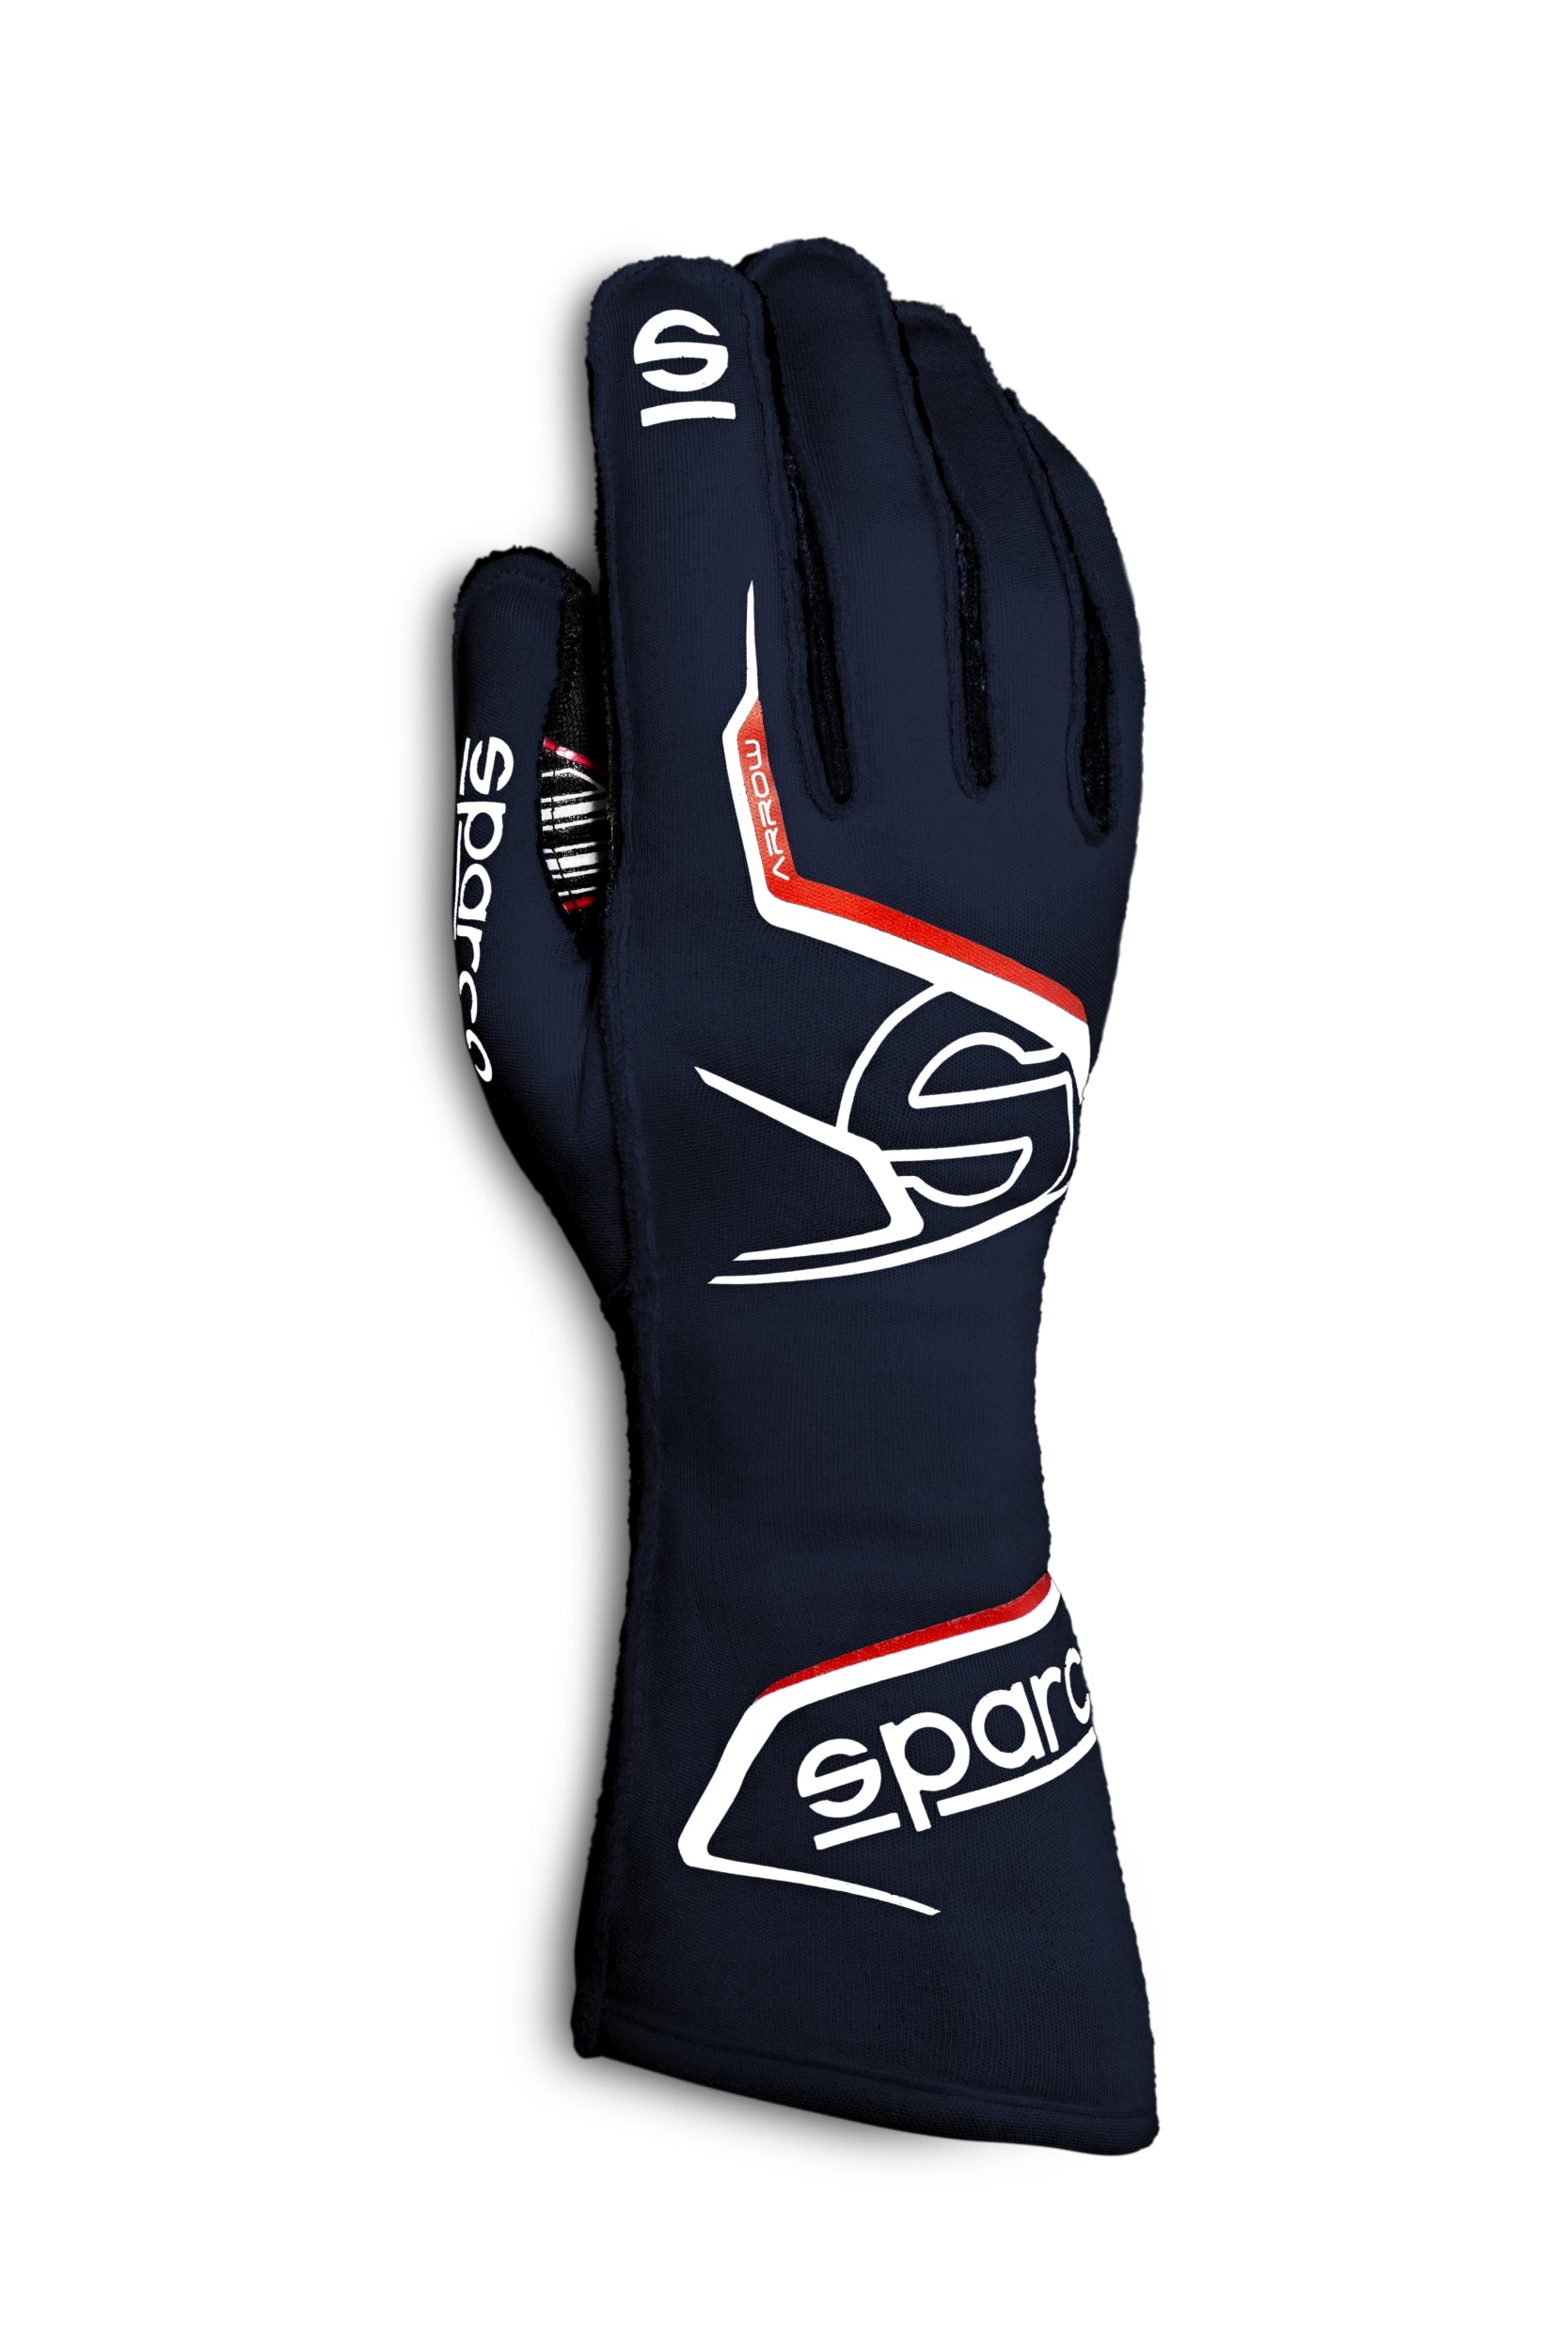 SPARCO 00131410BMRS ARROW Racing gloves, FIA 8856-2018, navy blue/red, size 10 Photo-0 